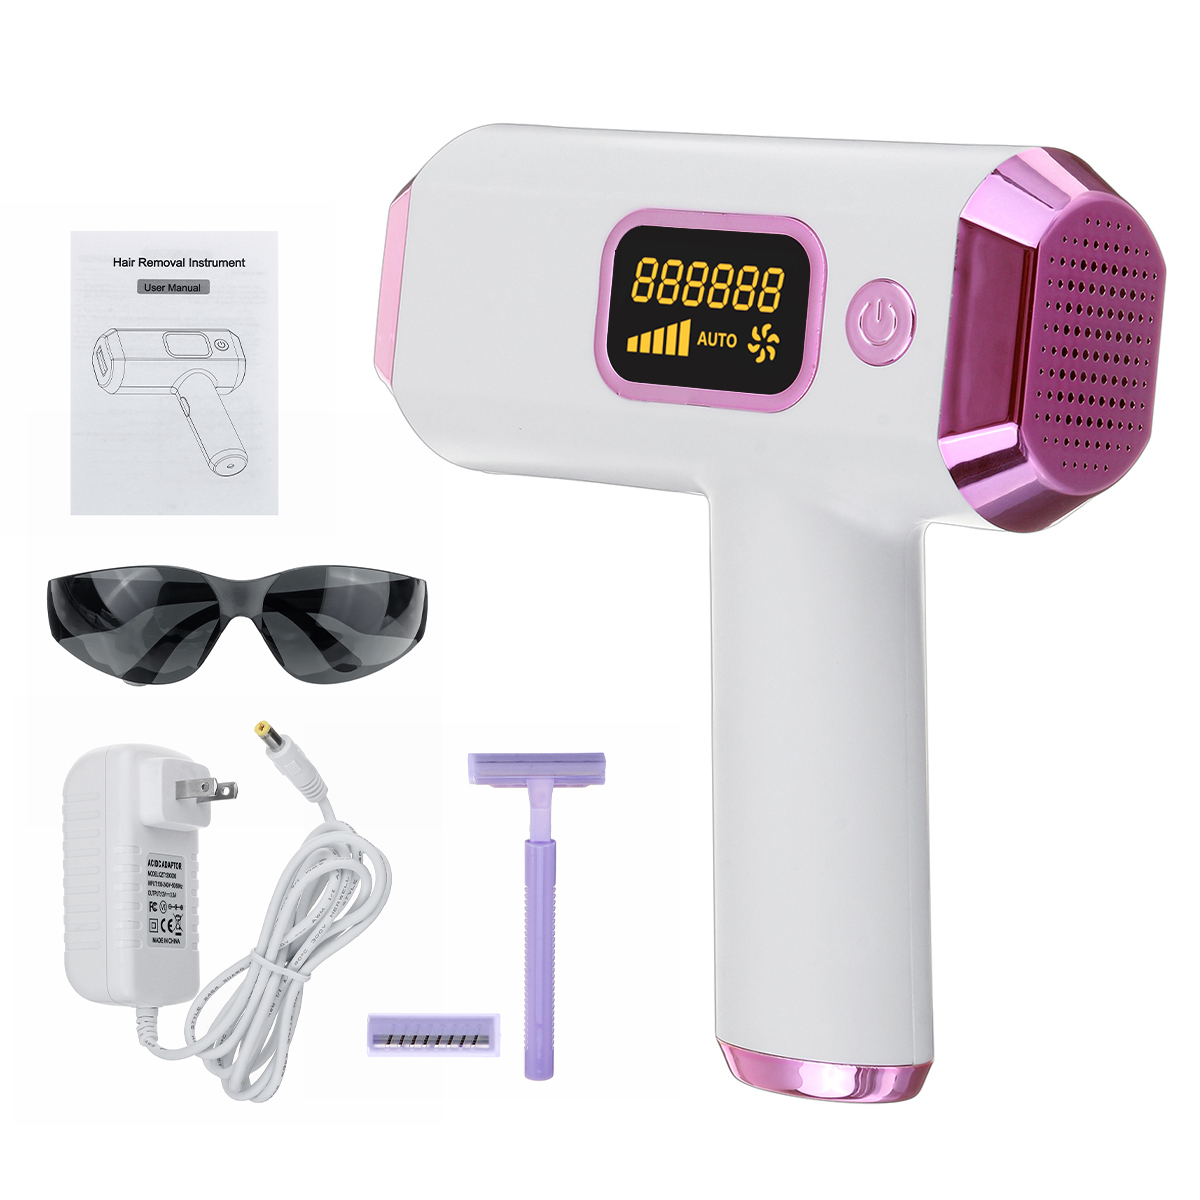 

999999 Flashes LCD Depilatory Instrument IPL Photon Hair Removal Home Painless Permanent Hair Removal Device Instrument Laser Shaving Epilator